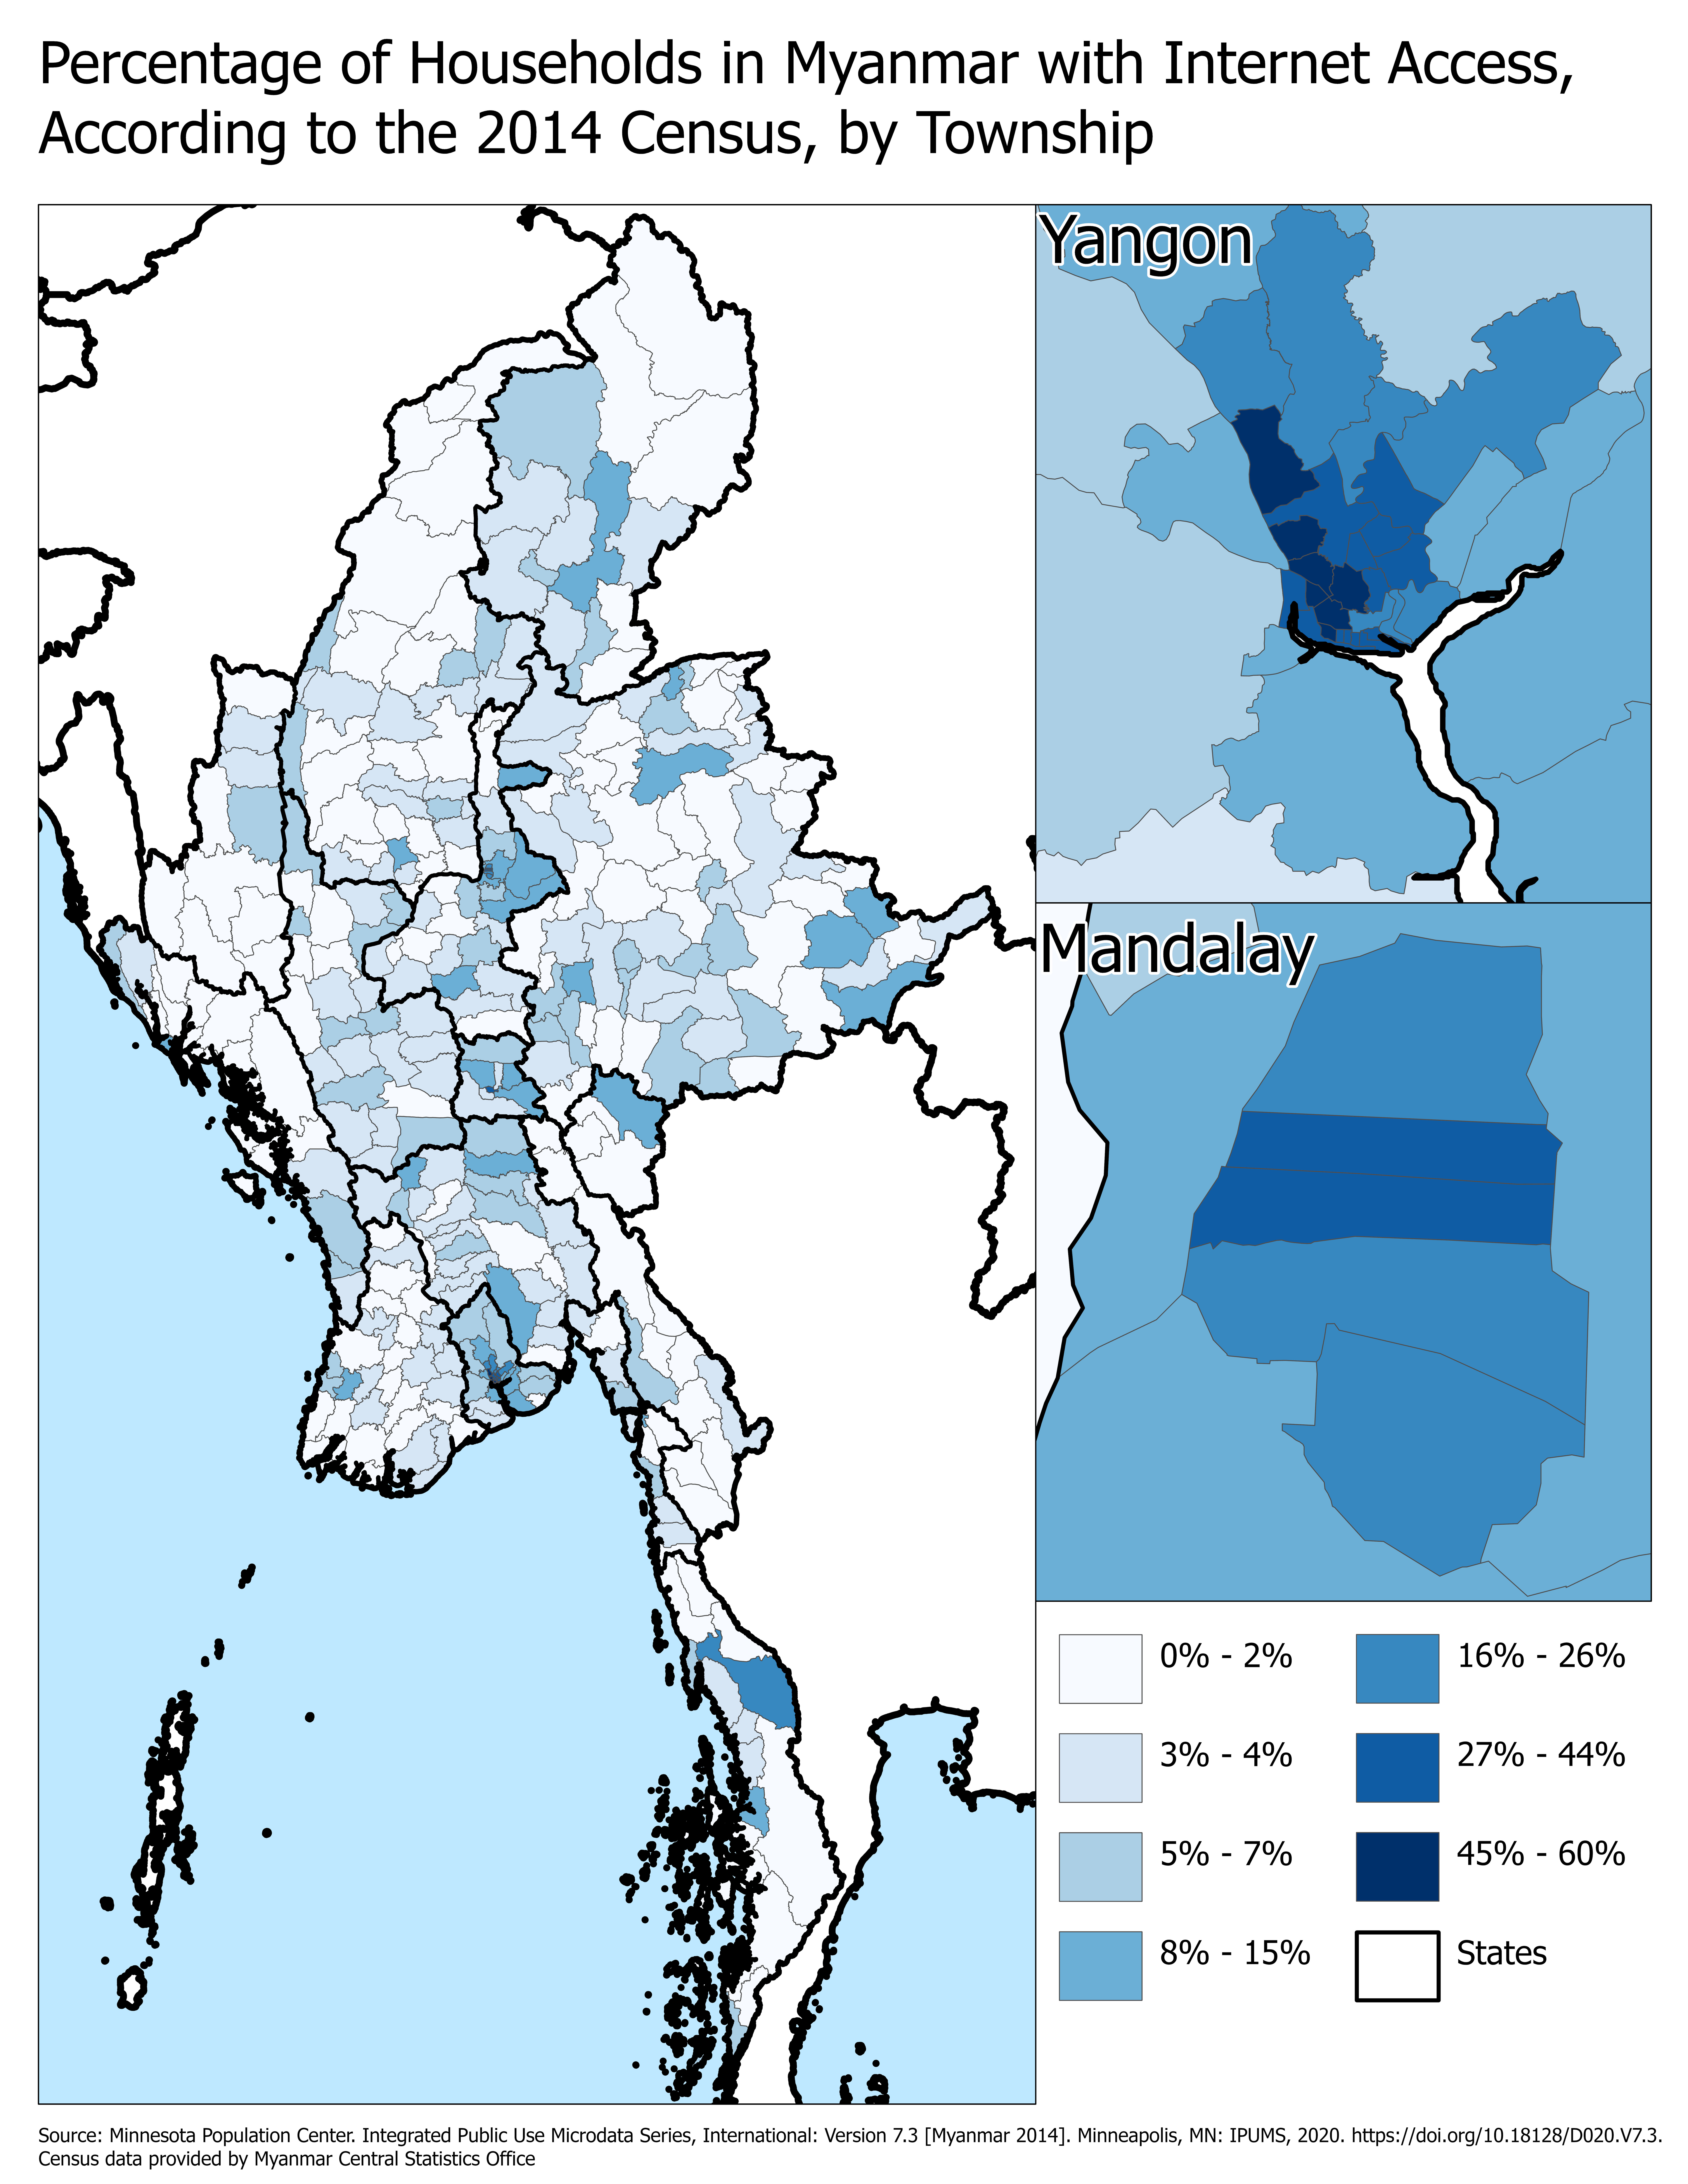 Map showing percentage of households with internet access in the 2014 Myanmar census by township